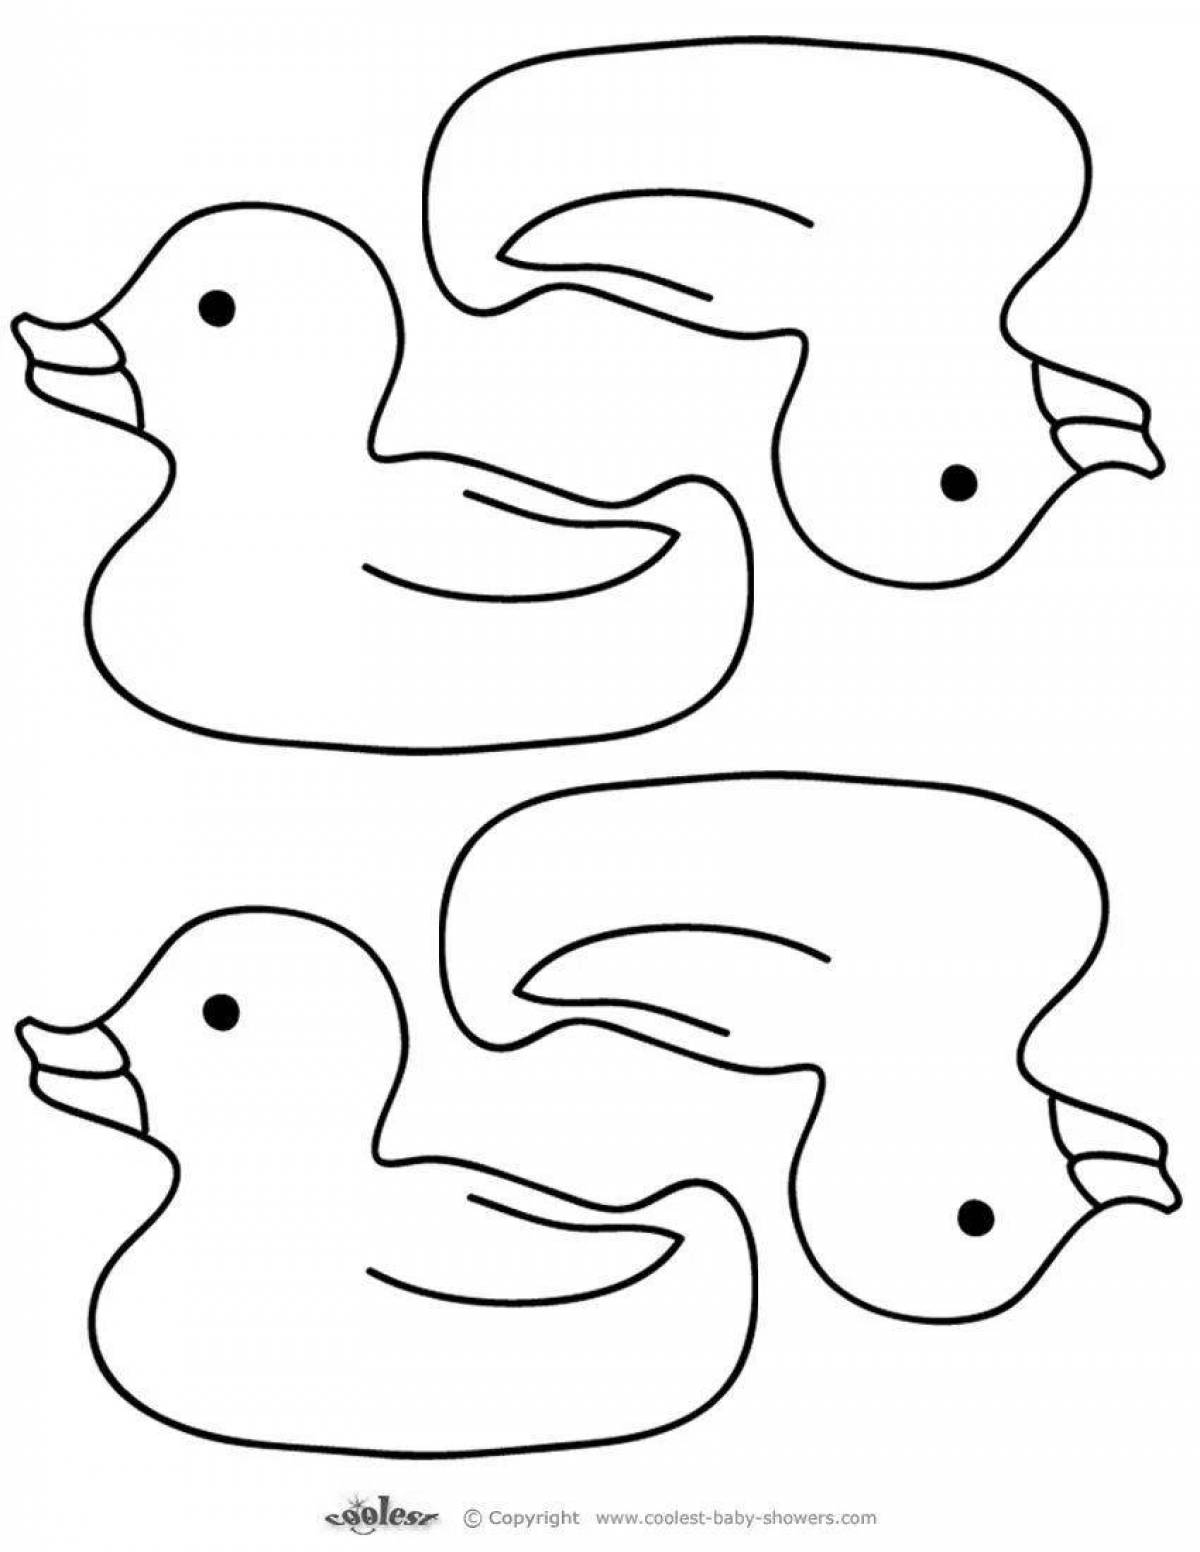 Glowing Dymkovo duck, second youngest coloring page